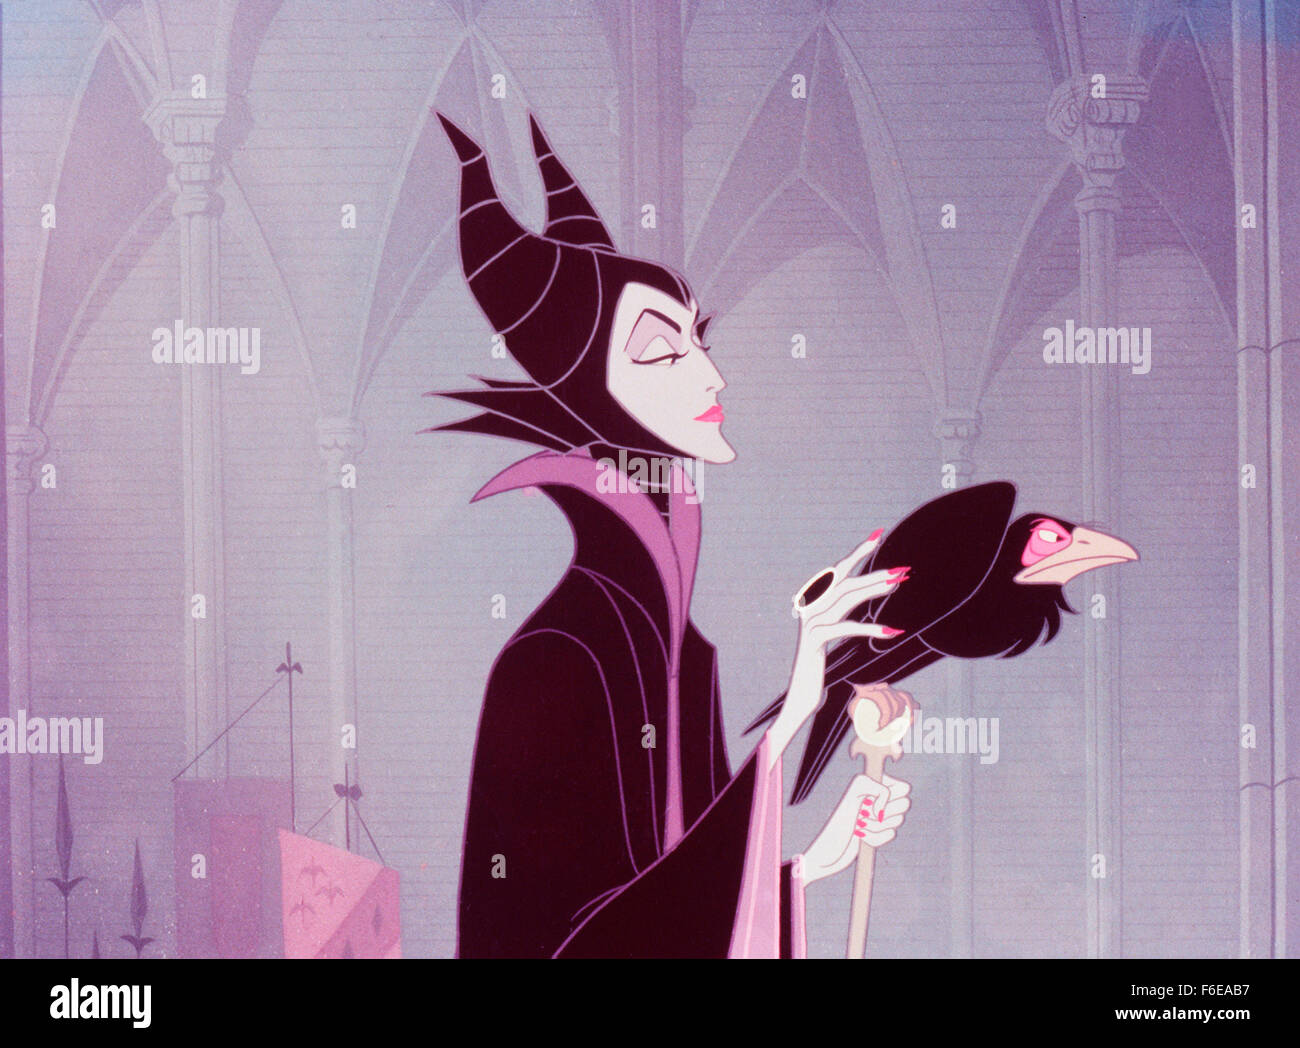 Jun 12, 1959; Burbank, CA, USA; Image from the classic animated tale 'Sleeping Beauty' with the character MALEFICENT. Stock Photo